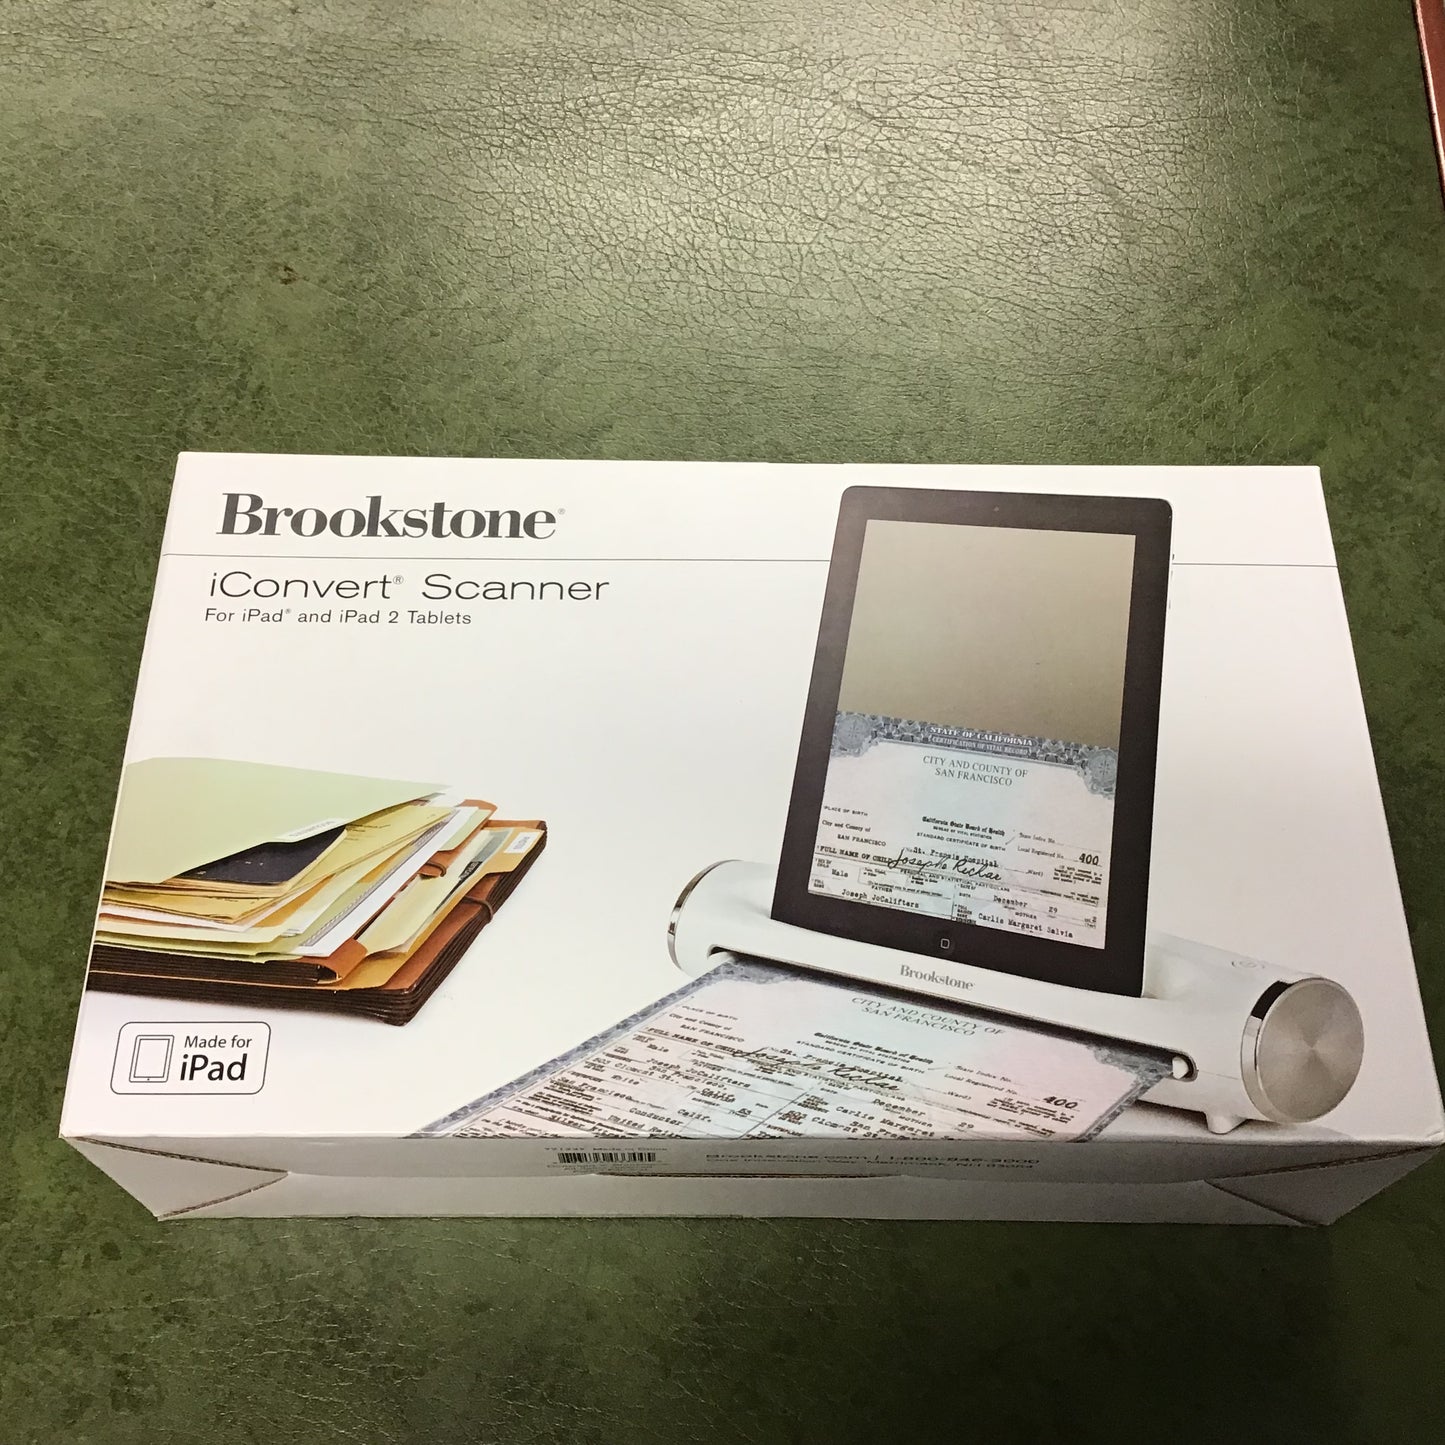 Brookstone iConvert Scanner for iPad and iPad 2 Tablets